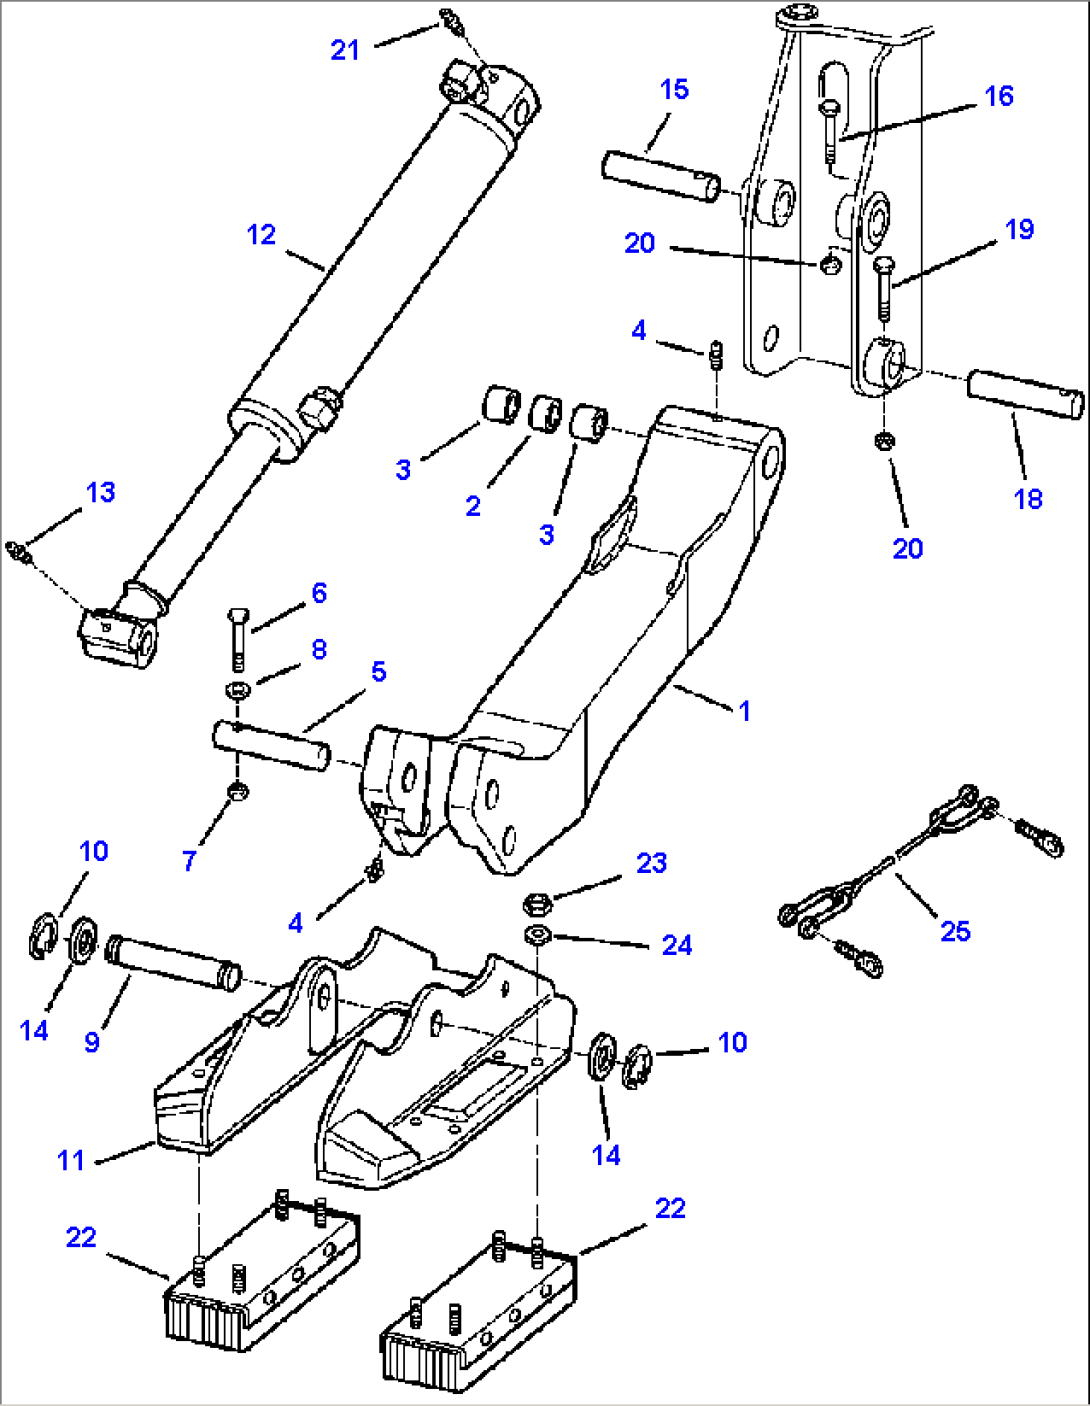 T2025-01A0 BACKHOE OUTRIGGERS